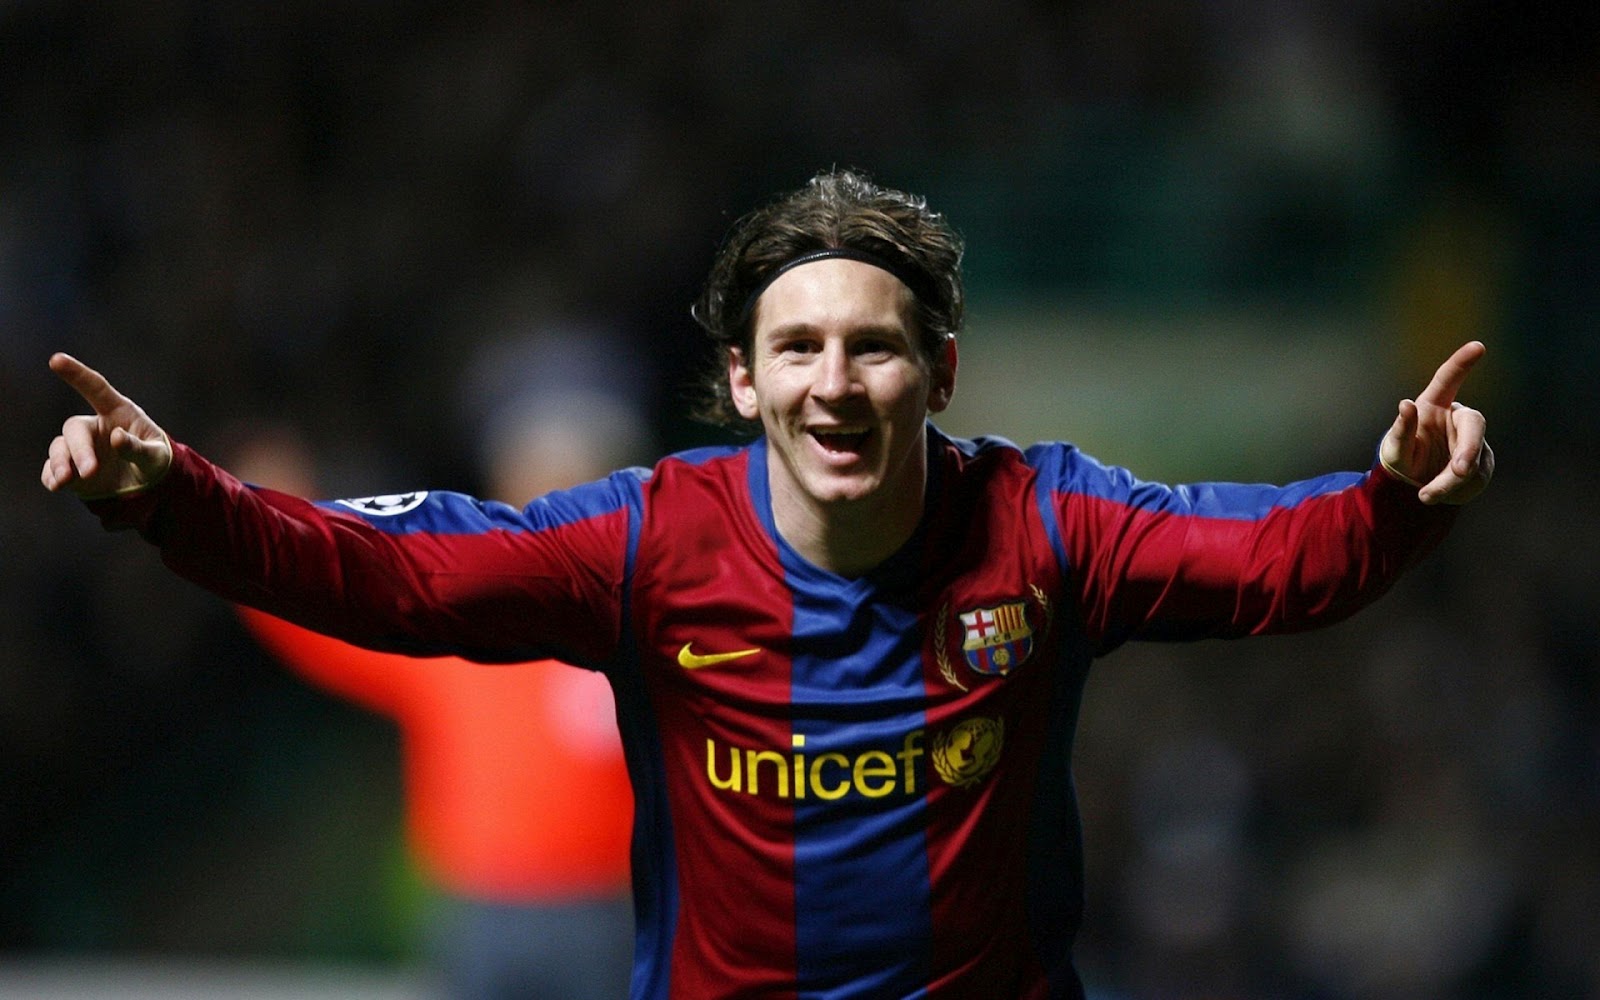  x messi hd wallpapers lionel messi hd wallpapers